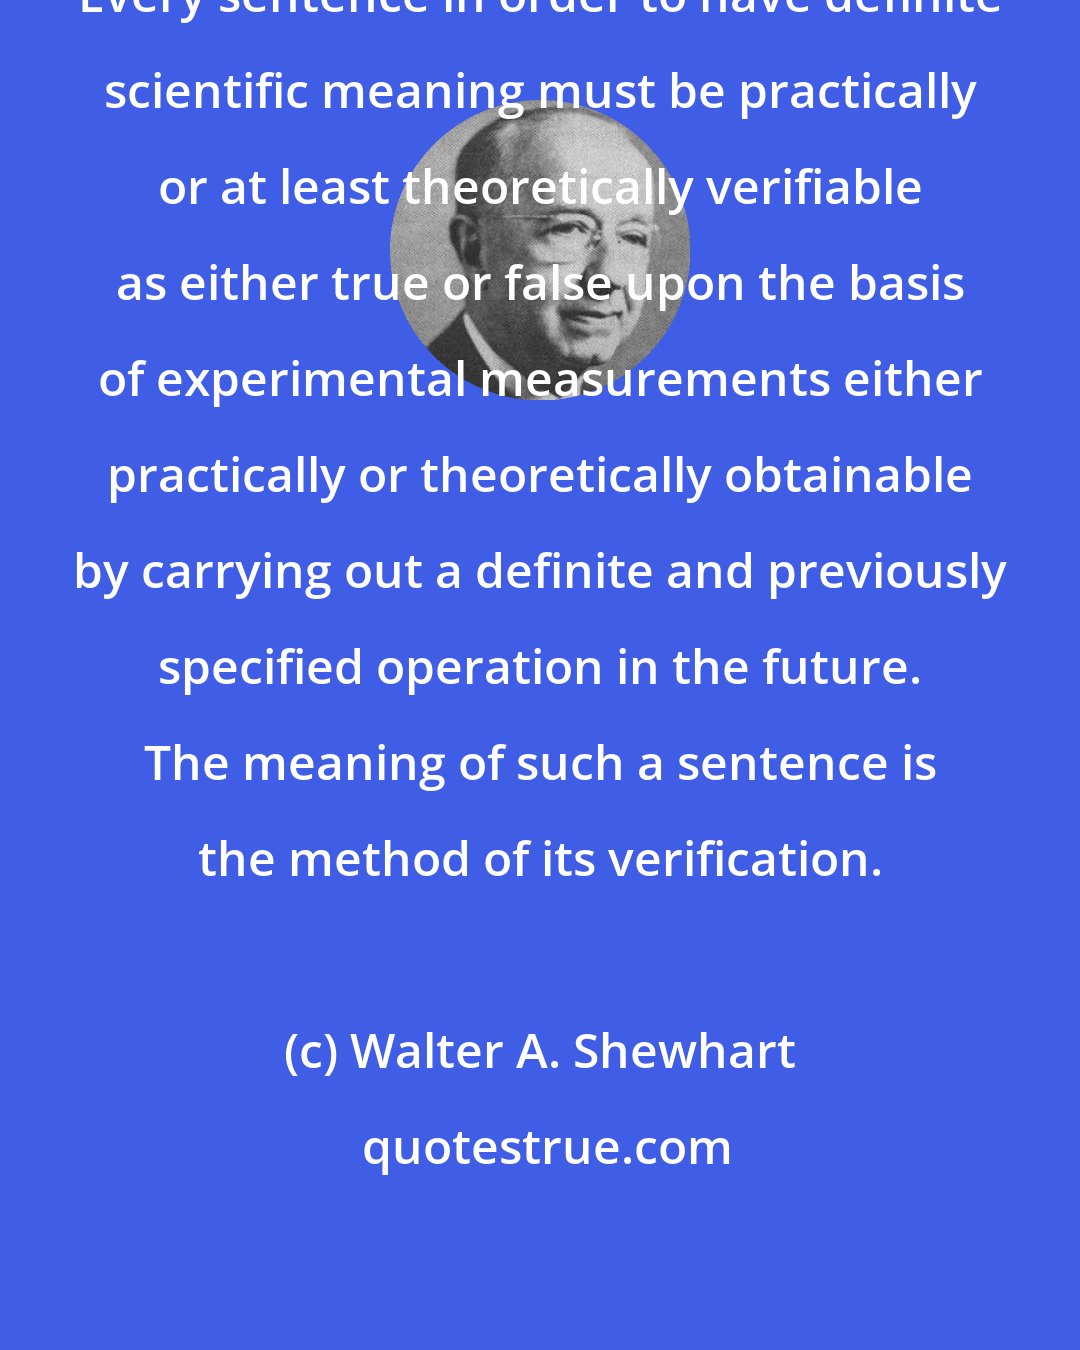 Walter A. Shewhart: Every sentence in order to have definite scientific meaning must be practically or at least theoretically verifiable as either true or false upon the basis of experimental measurements either practically or theoretically obtainable by carrying out a definite and previously specified operation in the future. The meaning of such a sentence is the method of its verification.